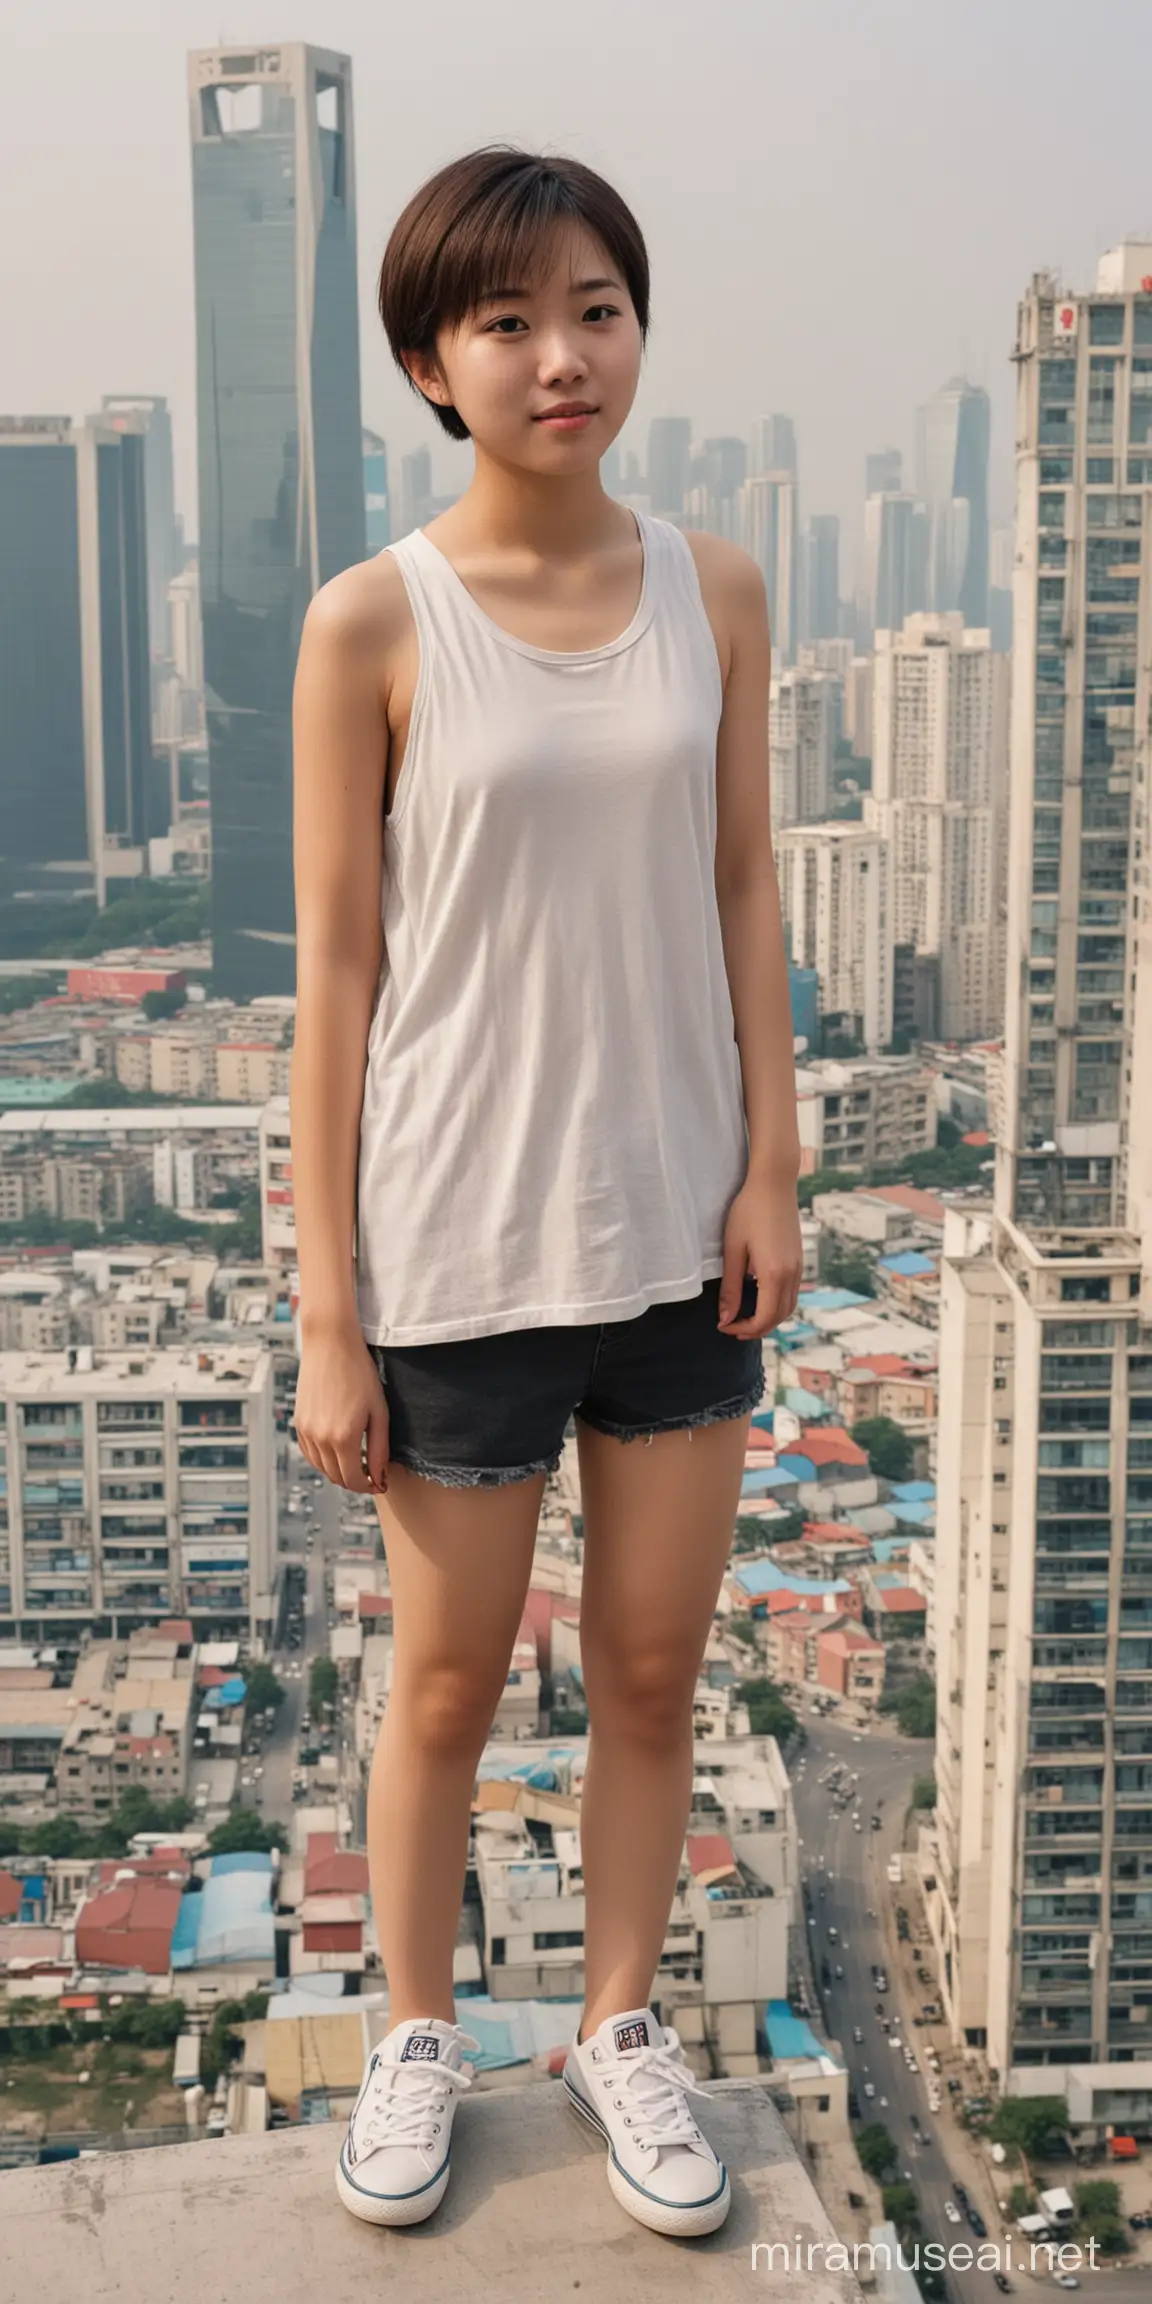 Young Chinese Woman Standing Atop Skyscraper